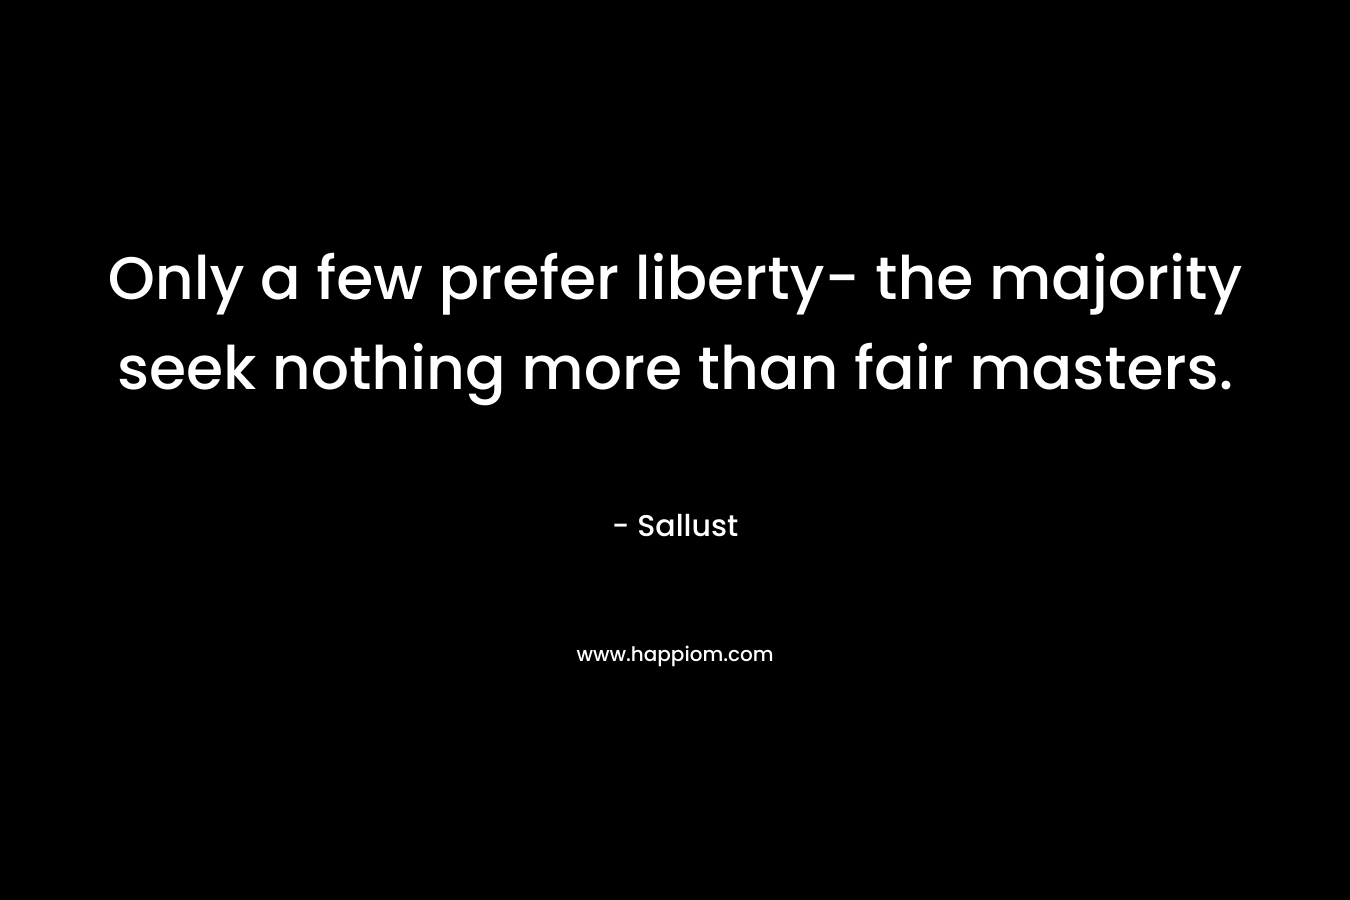 Only a few prefer liberty- the majority seek nothing more than fair masters.